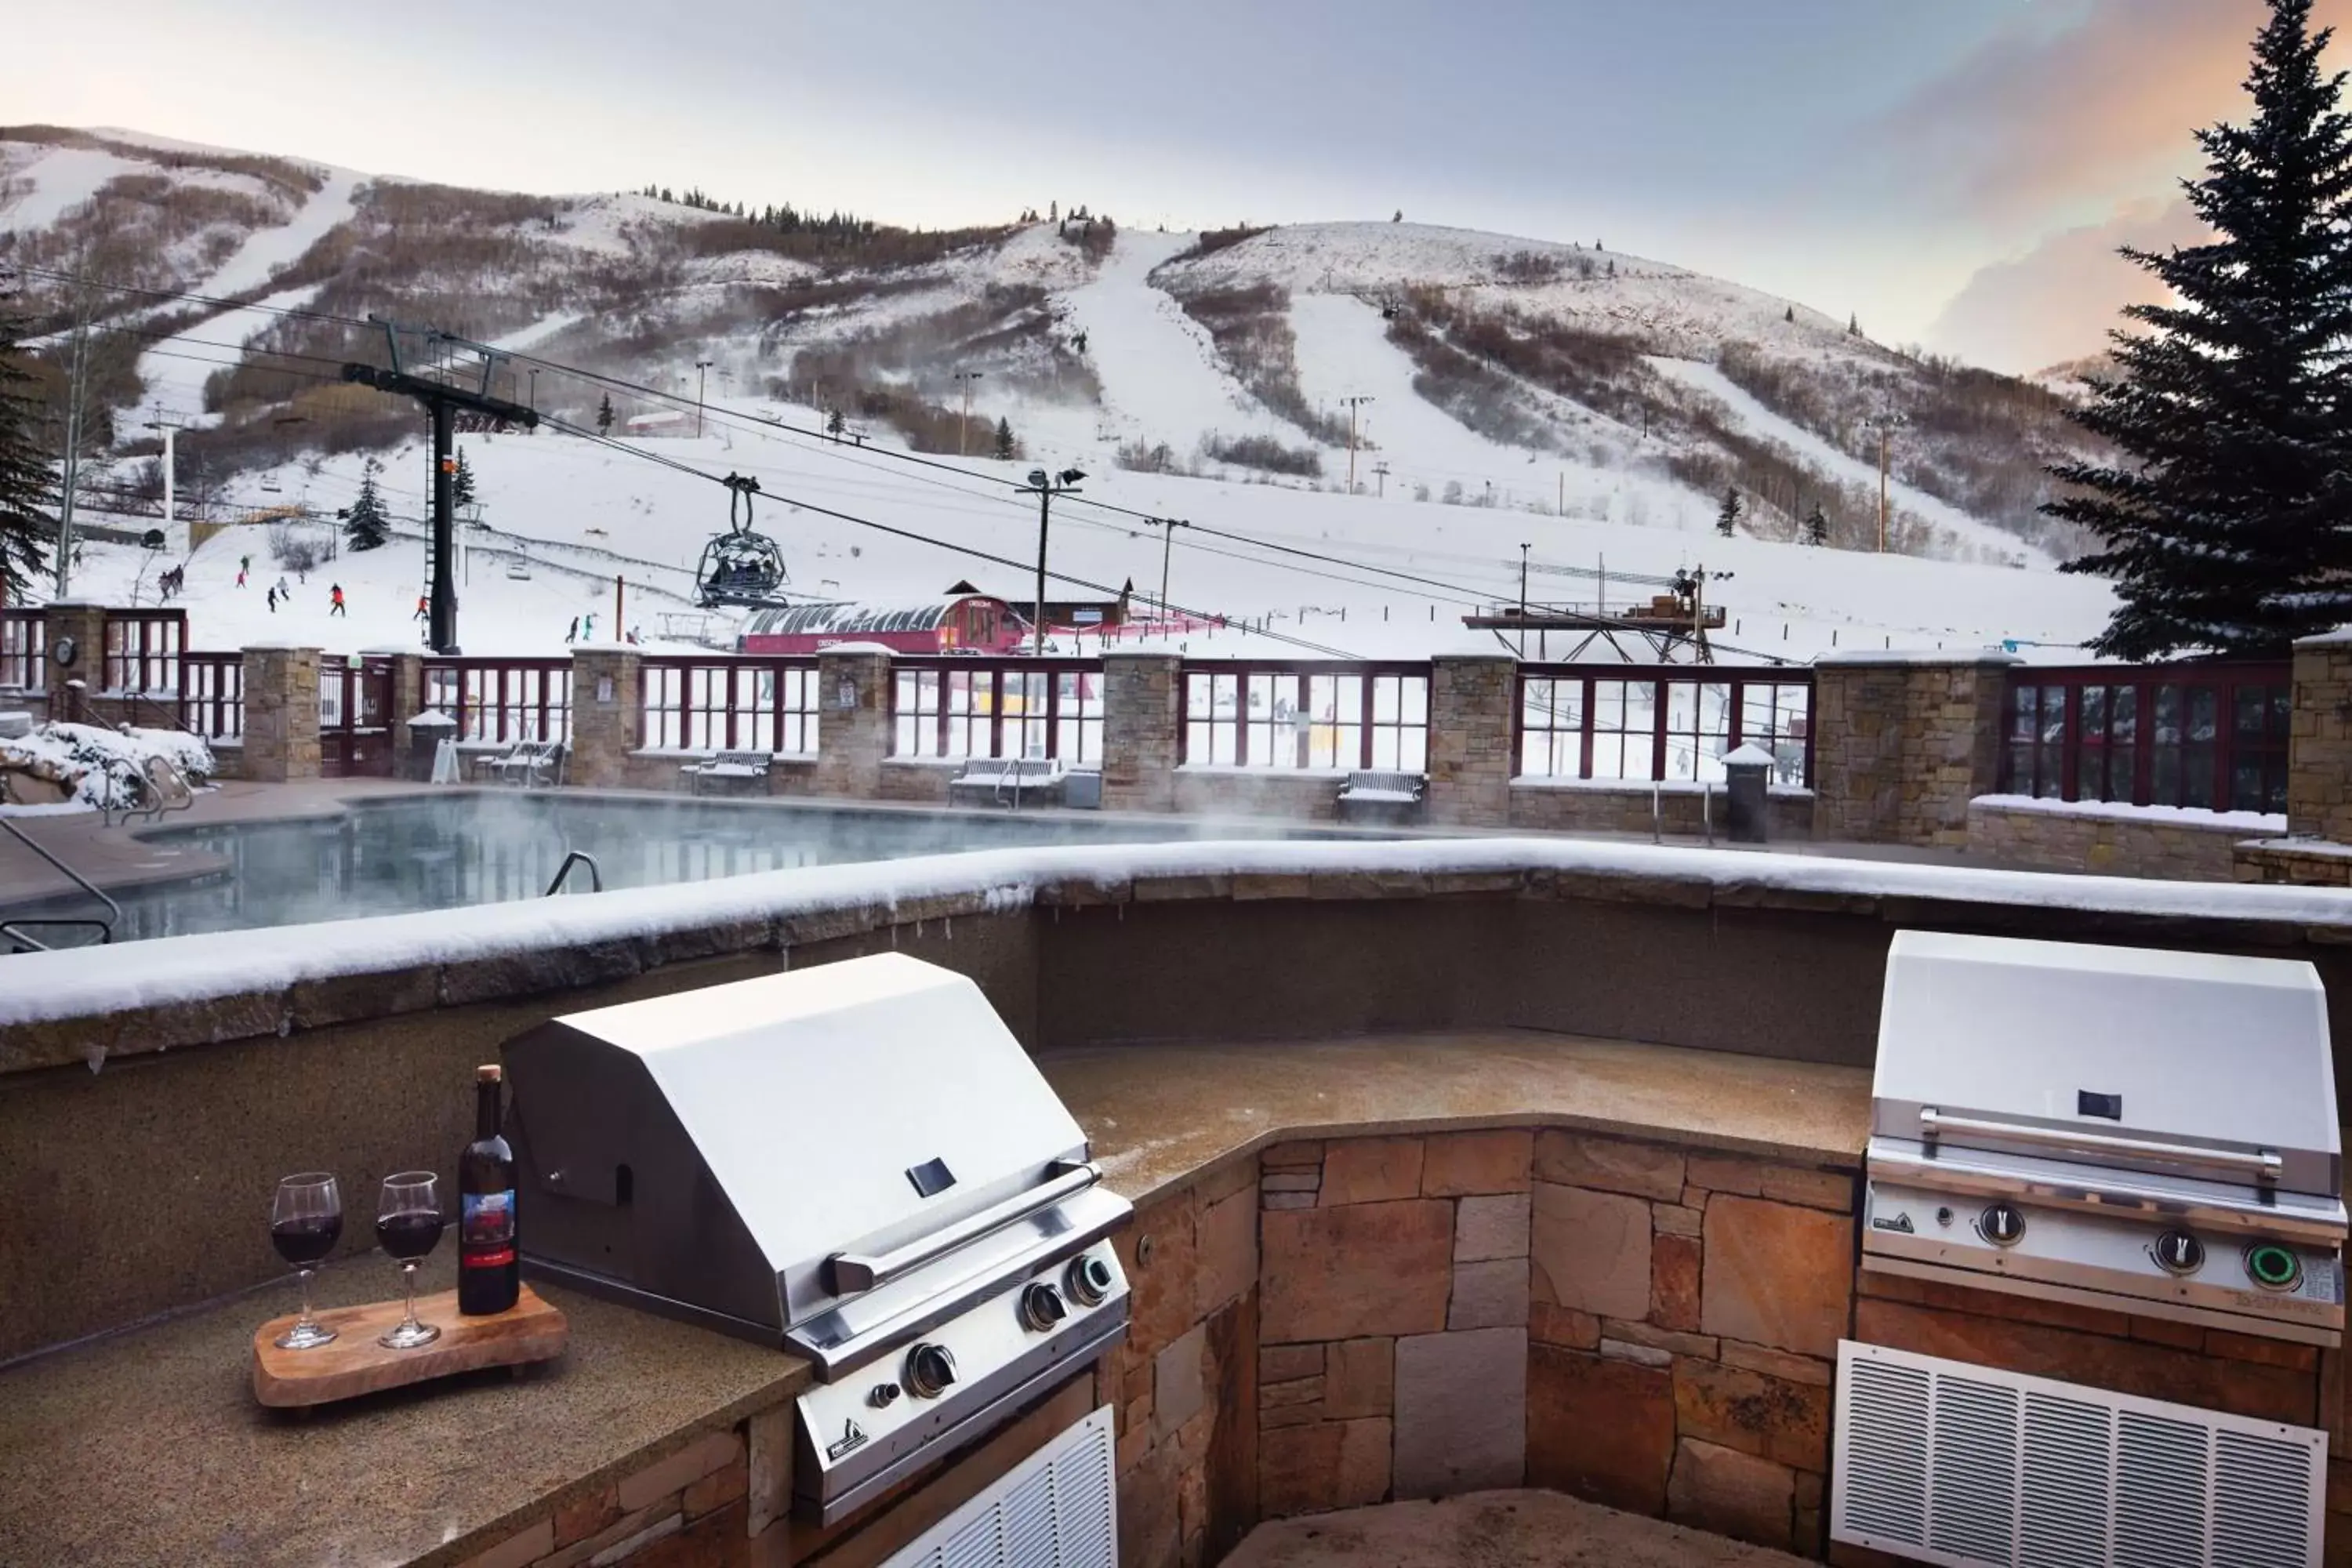 Restaurant/places to eat, Winter in Marriott's MountainSide